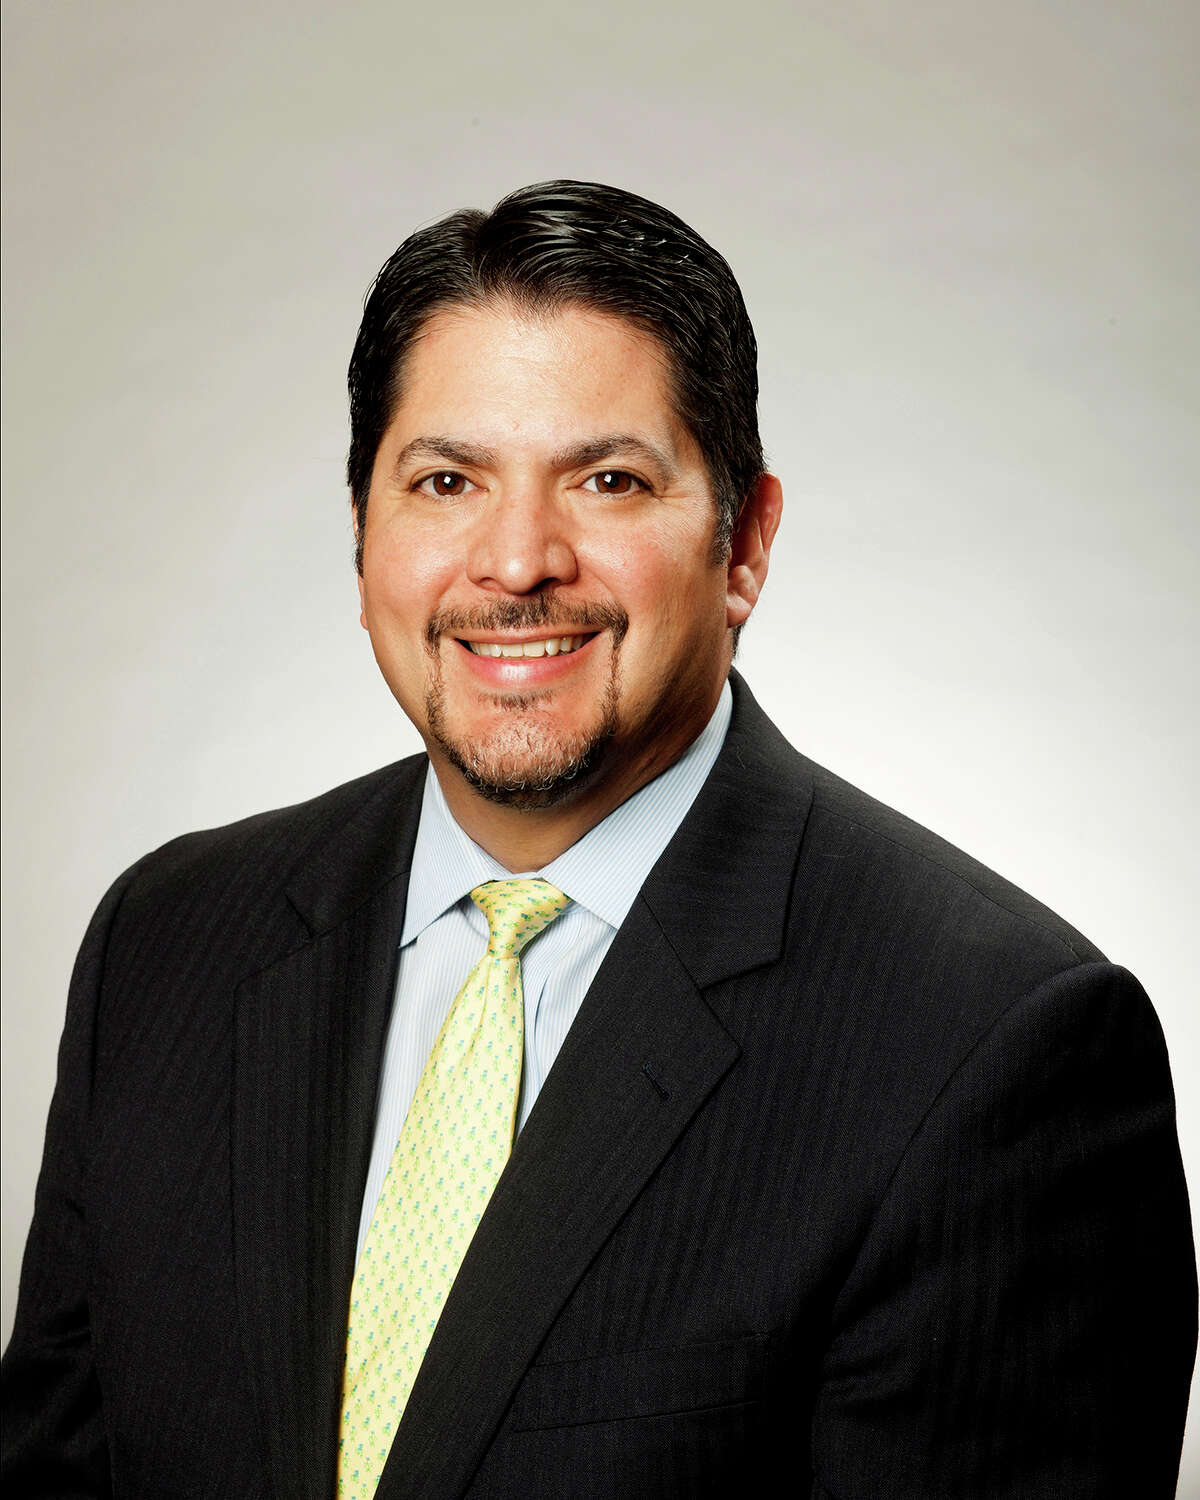 Rudy Garza will lead CPS Energy until the board selects a new CEO.